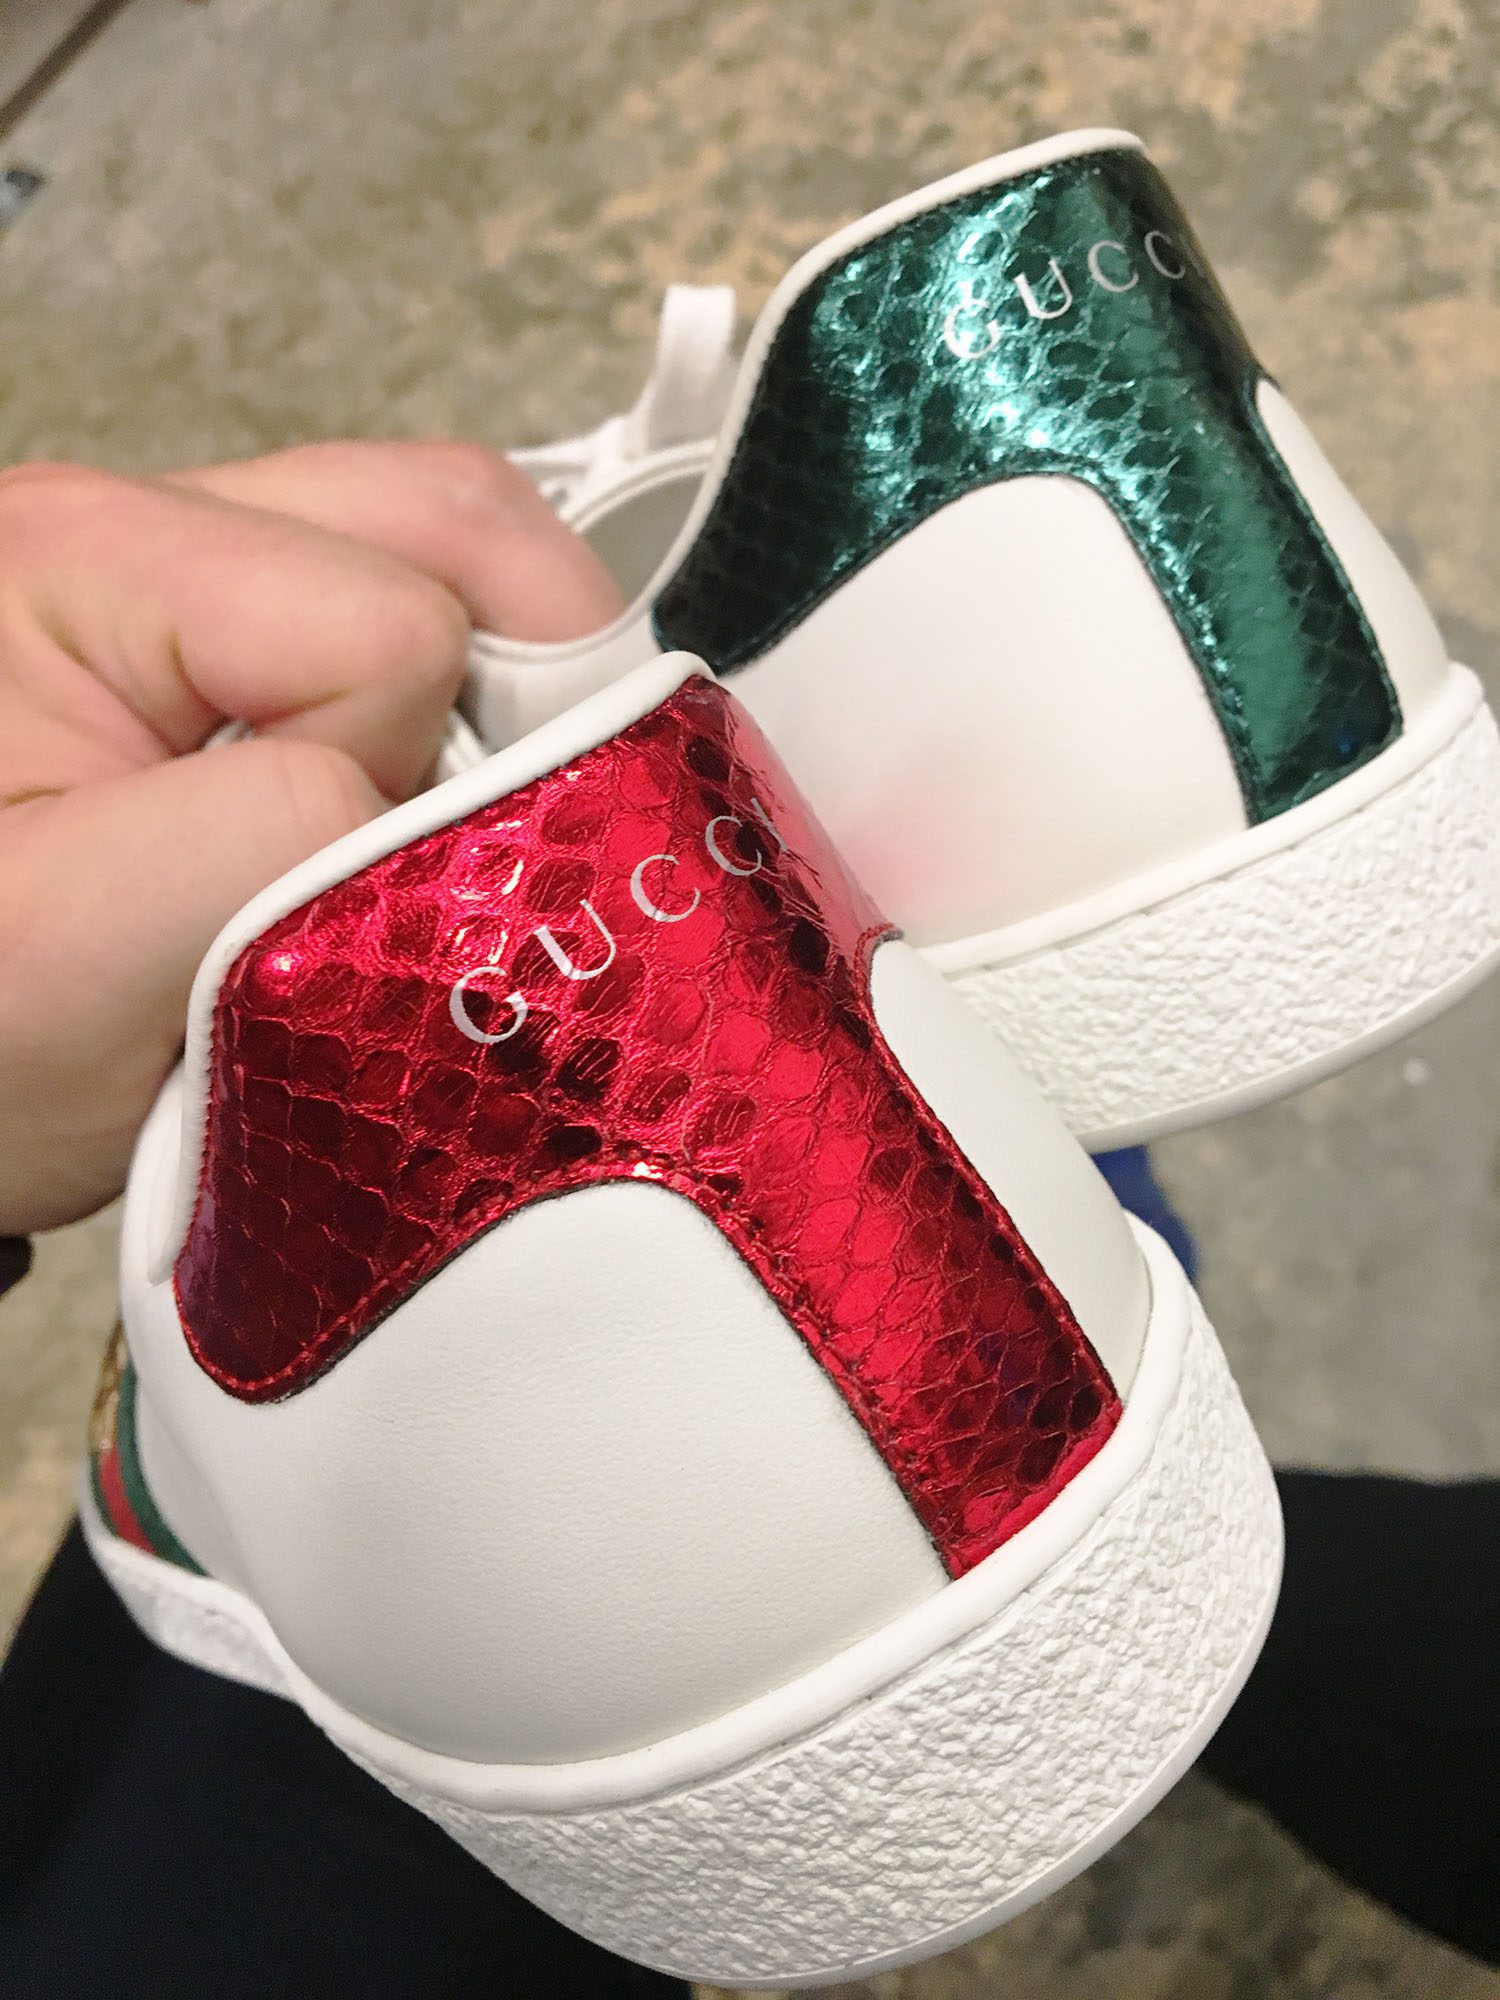 Gucci Ace Bee Sneaker has contrasting Gucci heels in red and green 